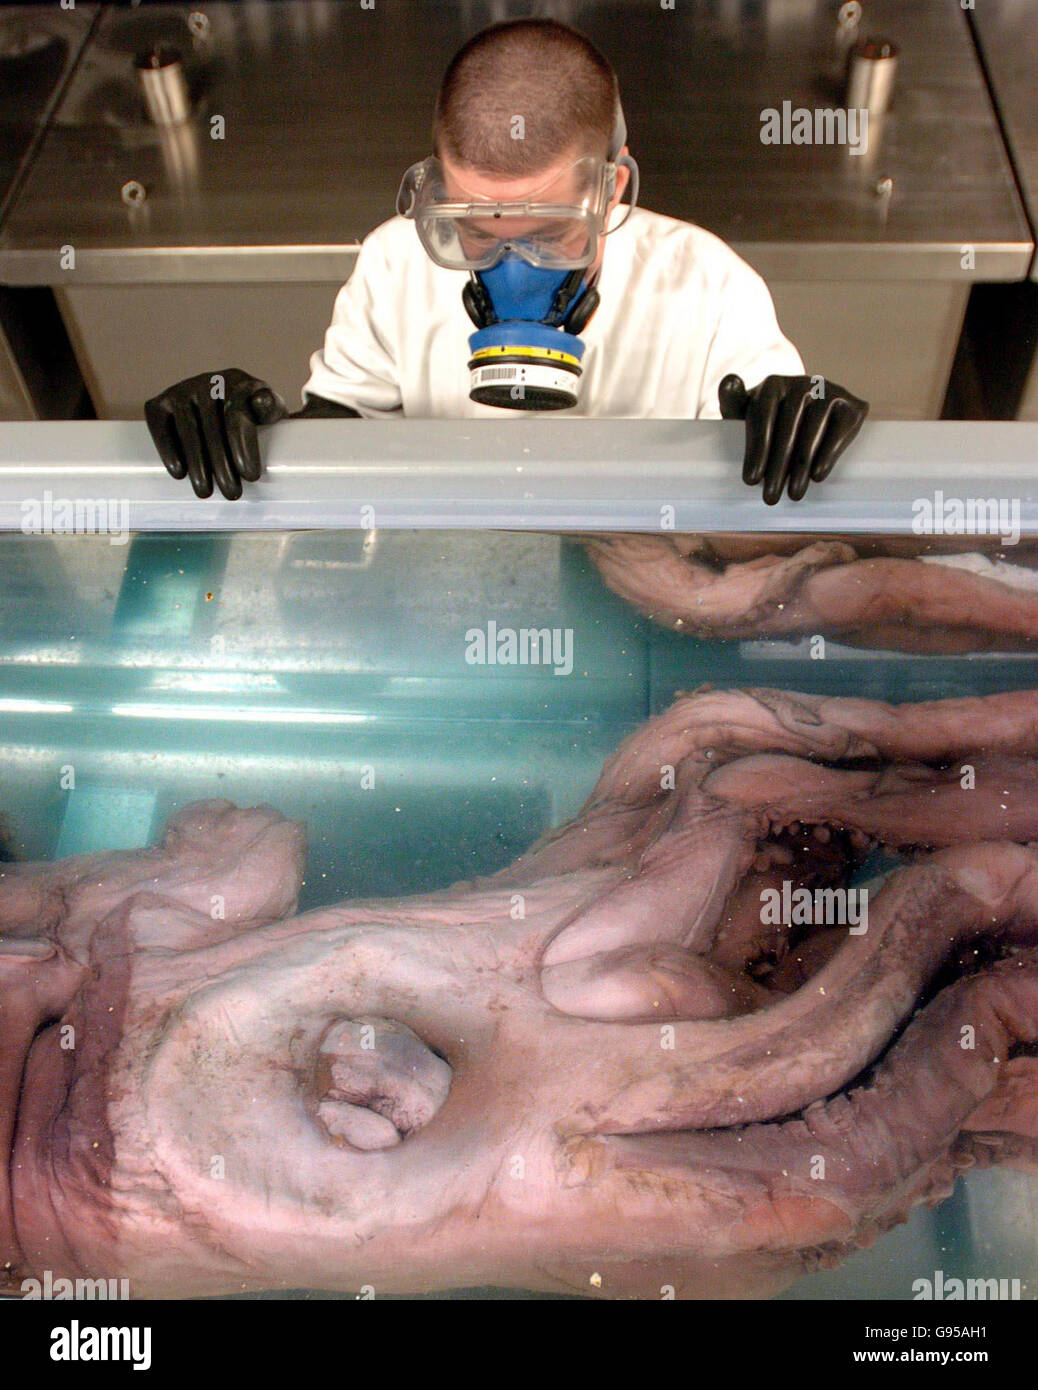 John Ablett, Mollusc Curator at the Natural History Museum, in London, Tuesday 28th February, looks down at the eye of a giant squid which goes on display at the museum's Darwin Centre today. The 30ft long creature, caught off the Falkland Islands in April 2005, is the most complete giant squid ever found . See PA story PRESS ASSOCIATION PHOTO. Photo credit should read: Ian Nicholson/PA Stock Photo